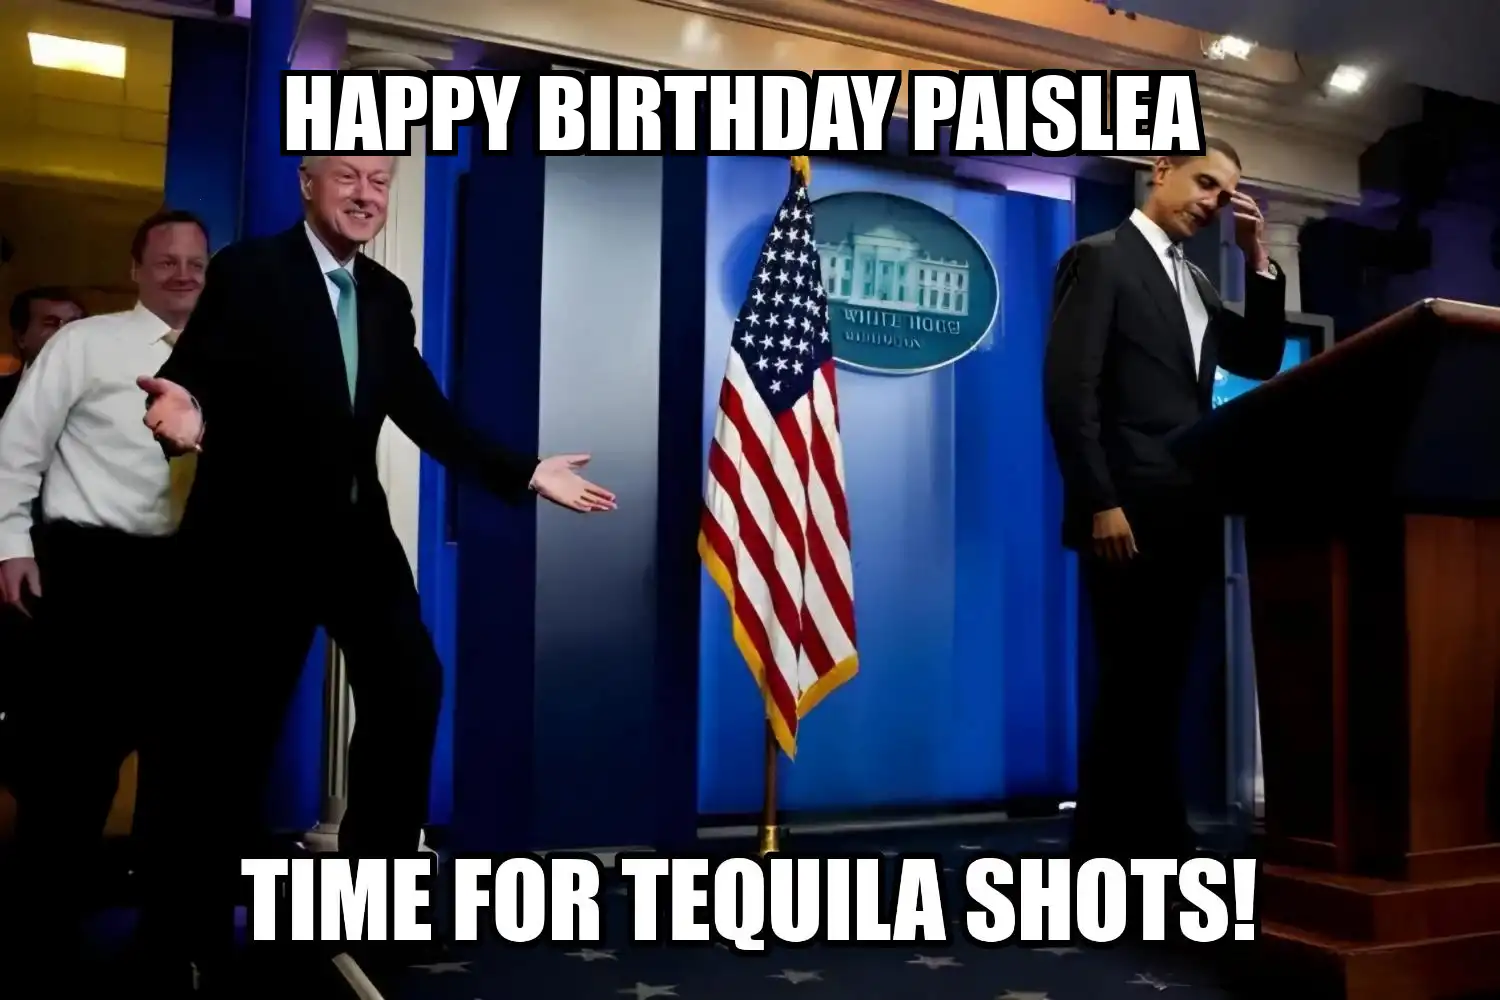 Happy Birthday Paislea Time For Tequila Shots Memes